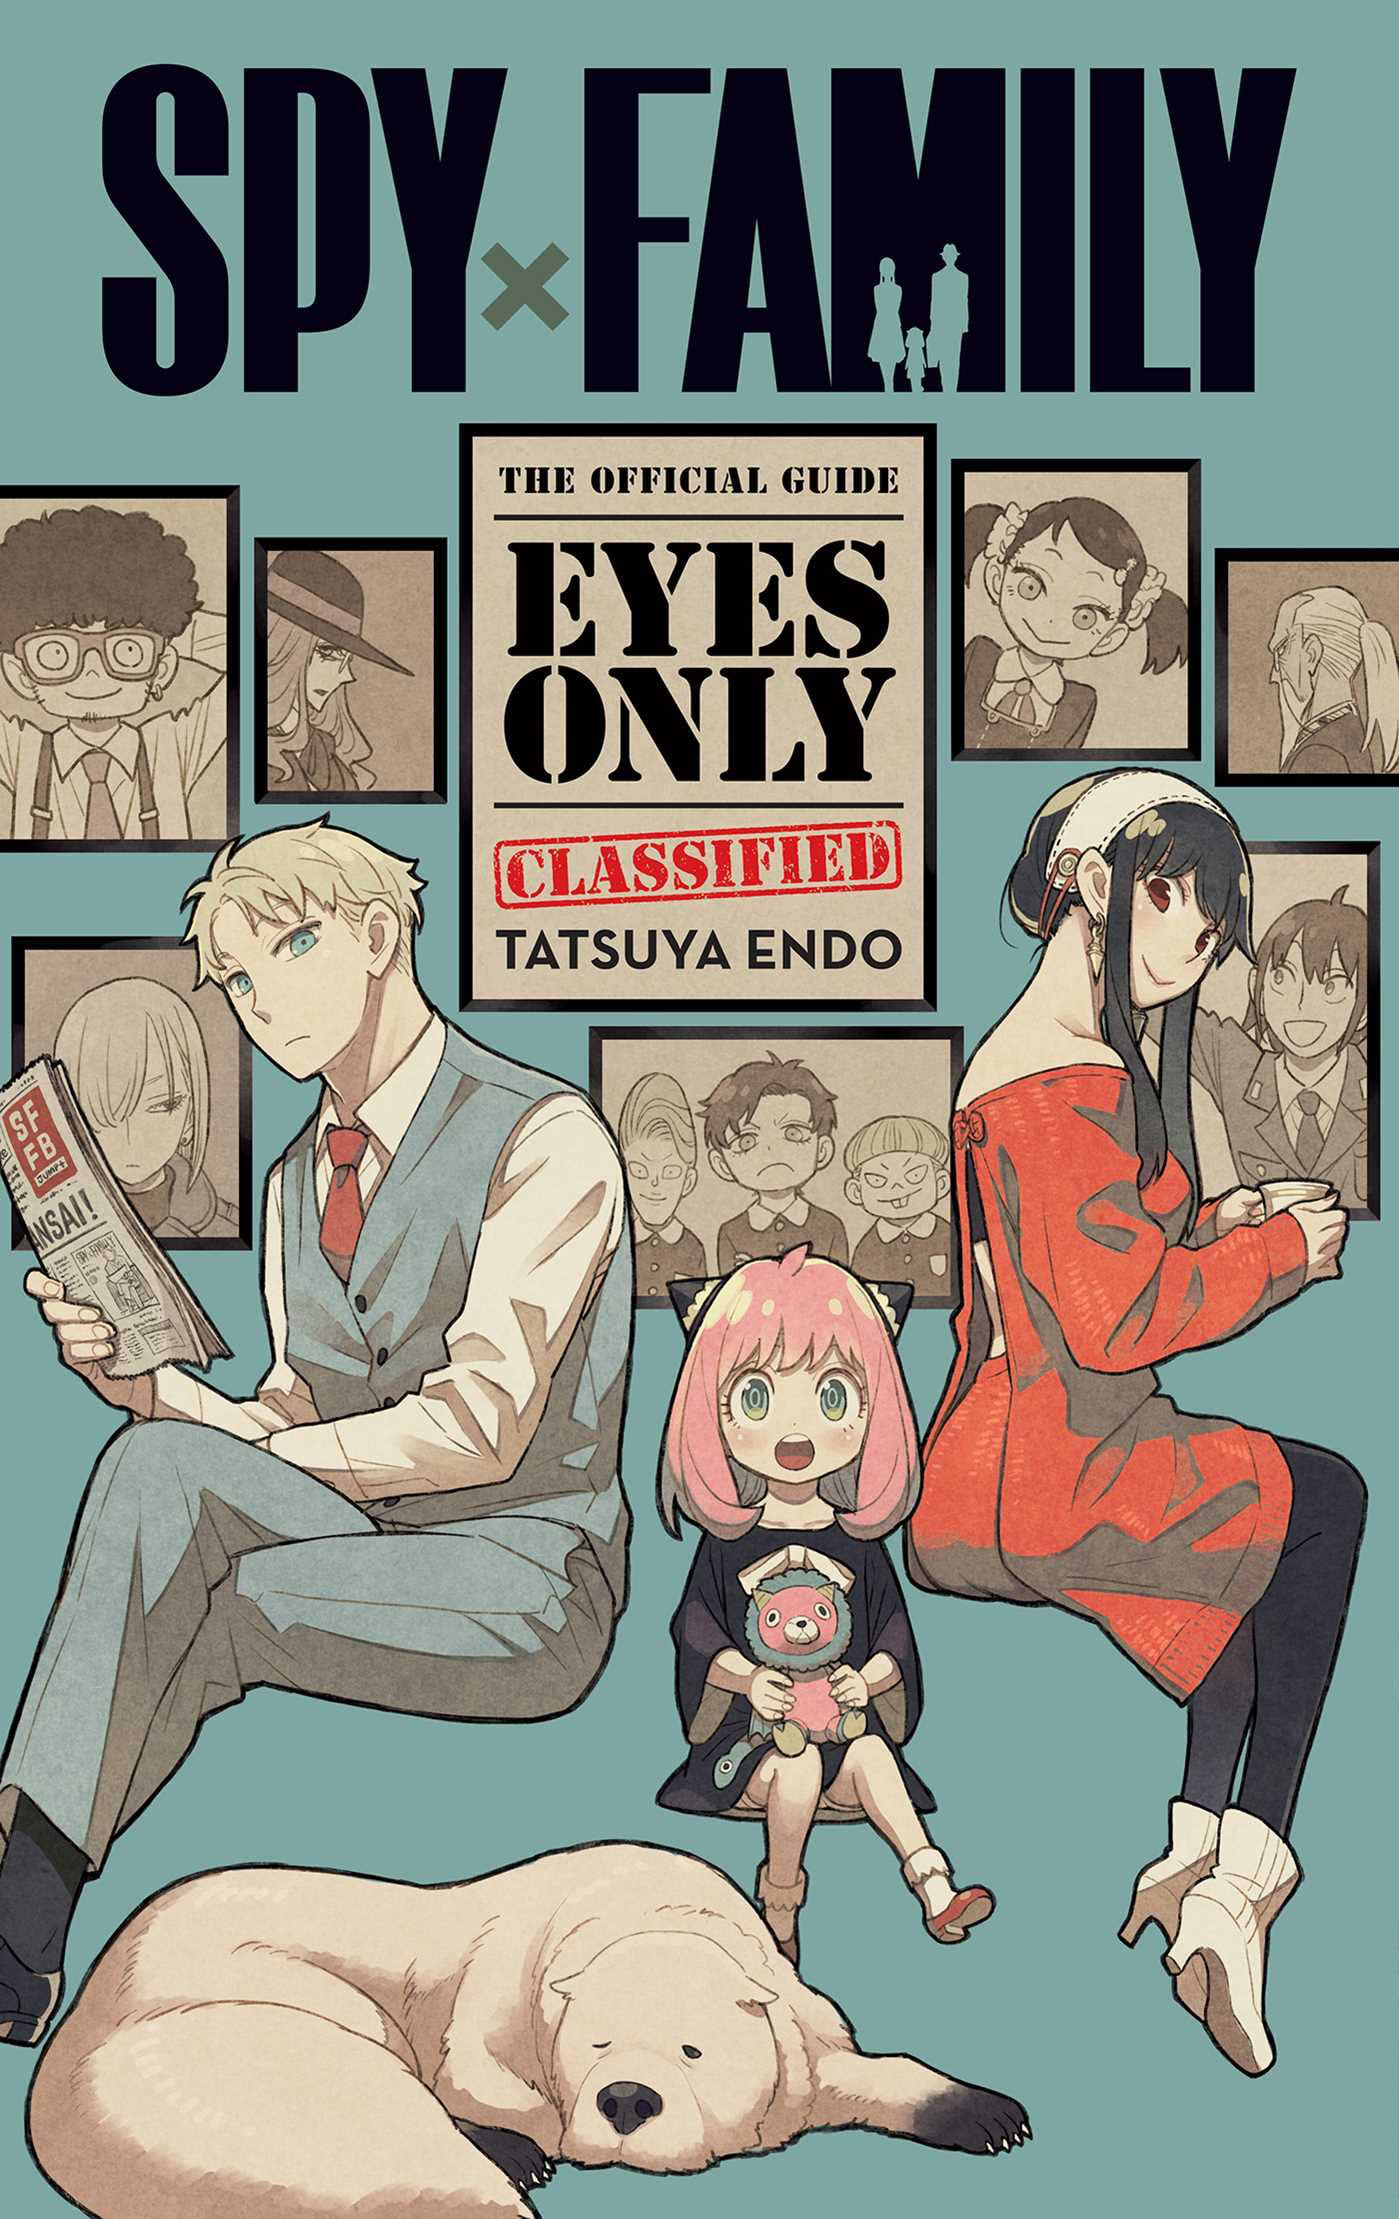 Watch Spy x Family Anime Online For Free [Legally] - Fossbytes